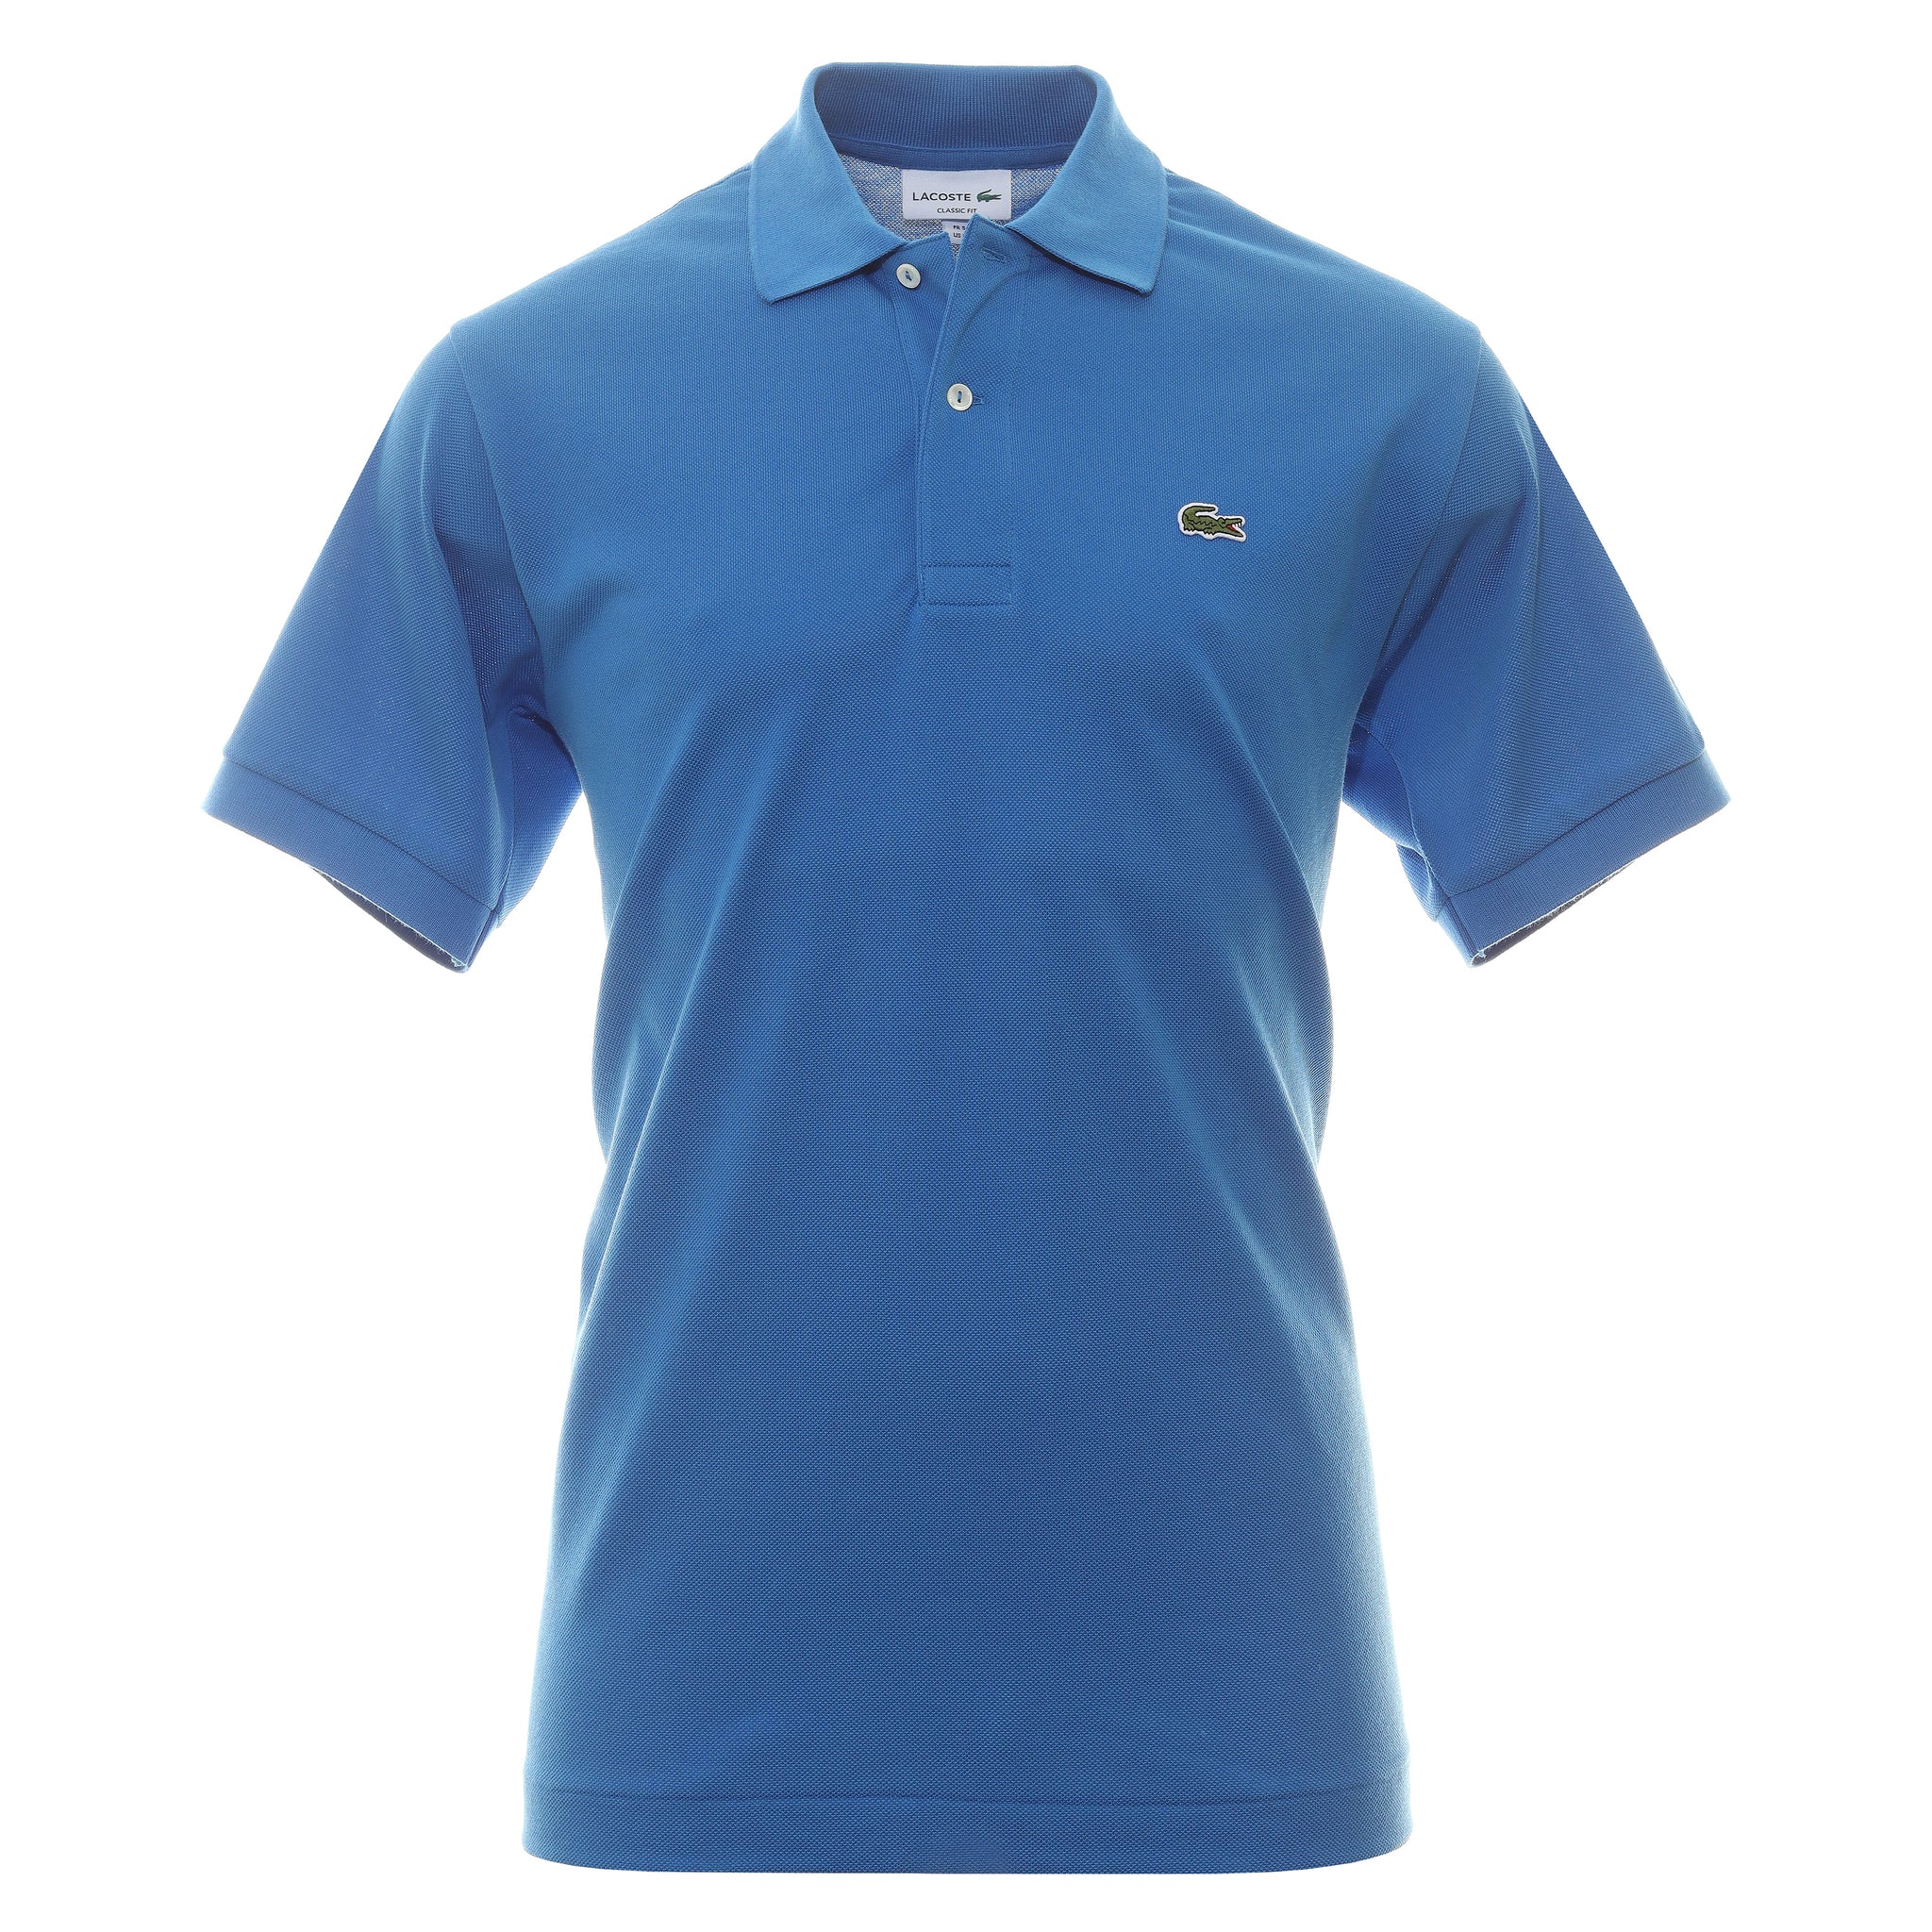 Lacoste Classic Pique Polo Shirt L1212 Blue SIY | Function18 | Restrictedgs